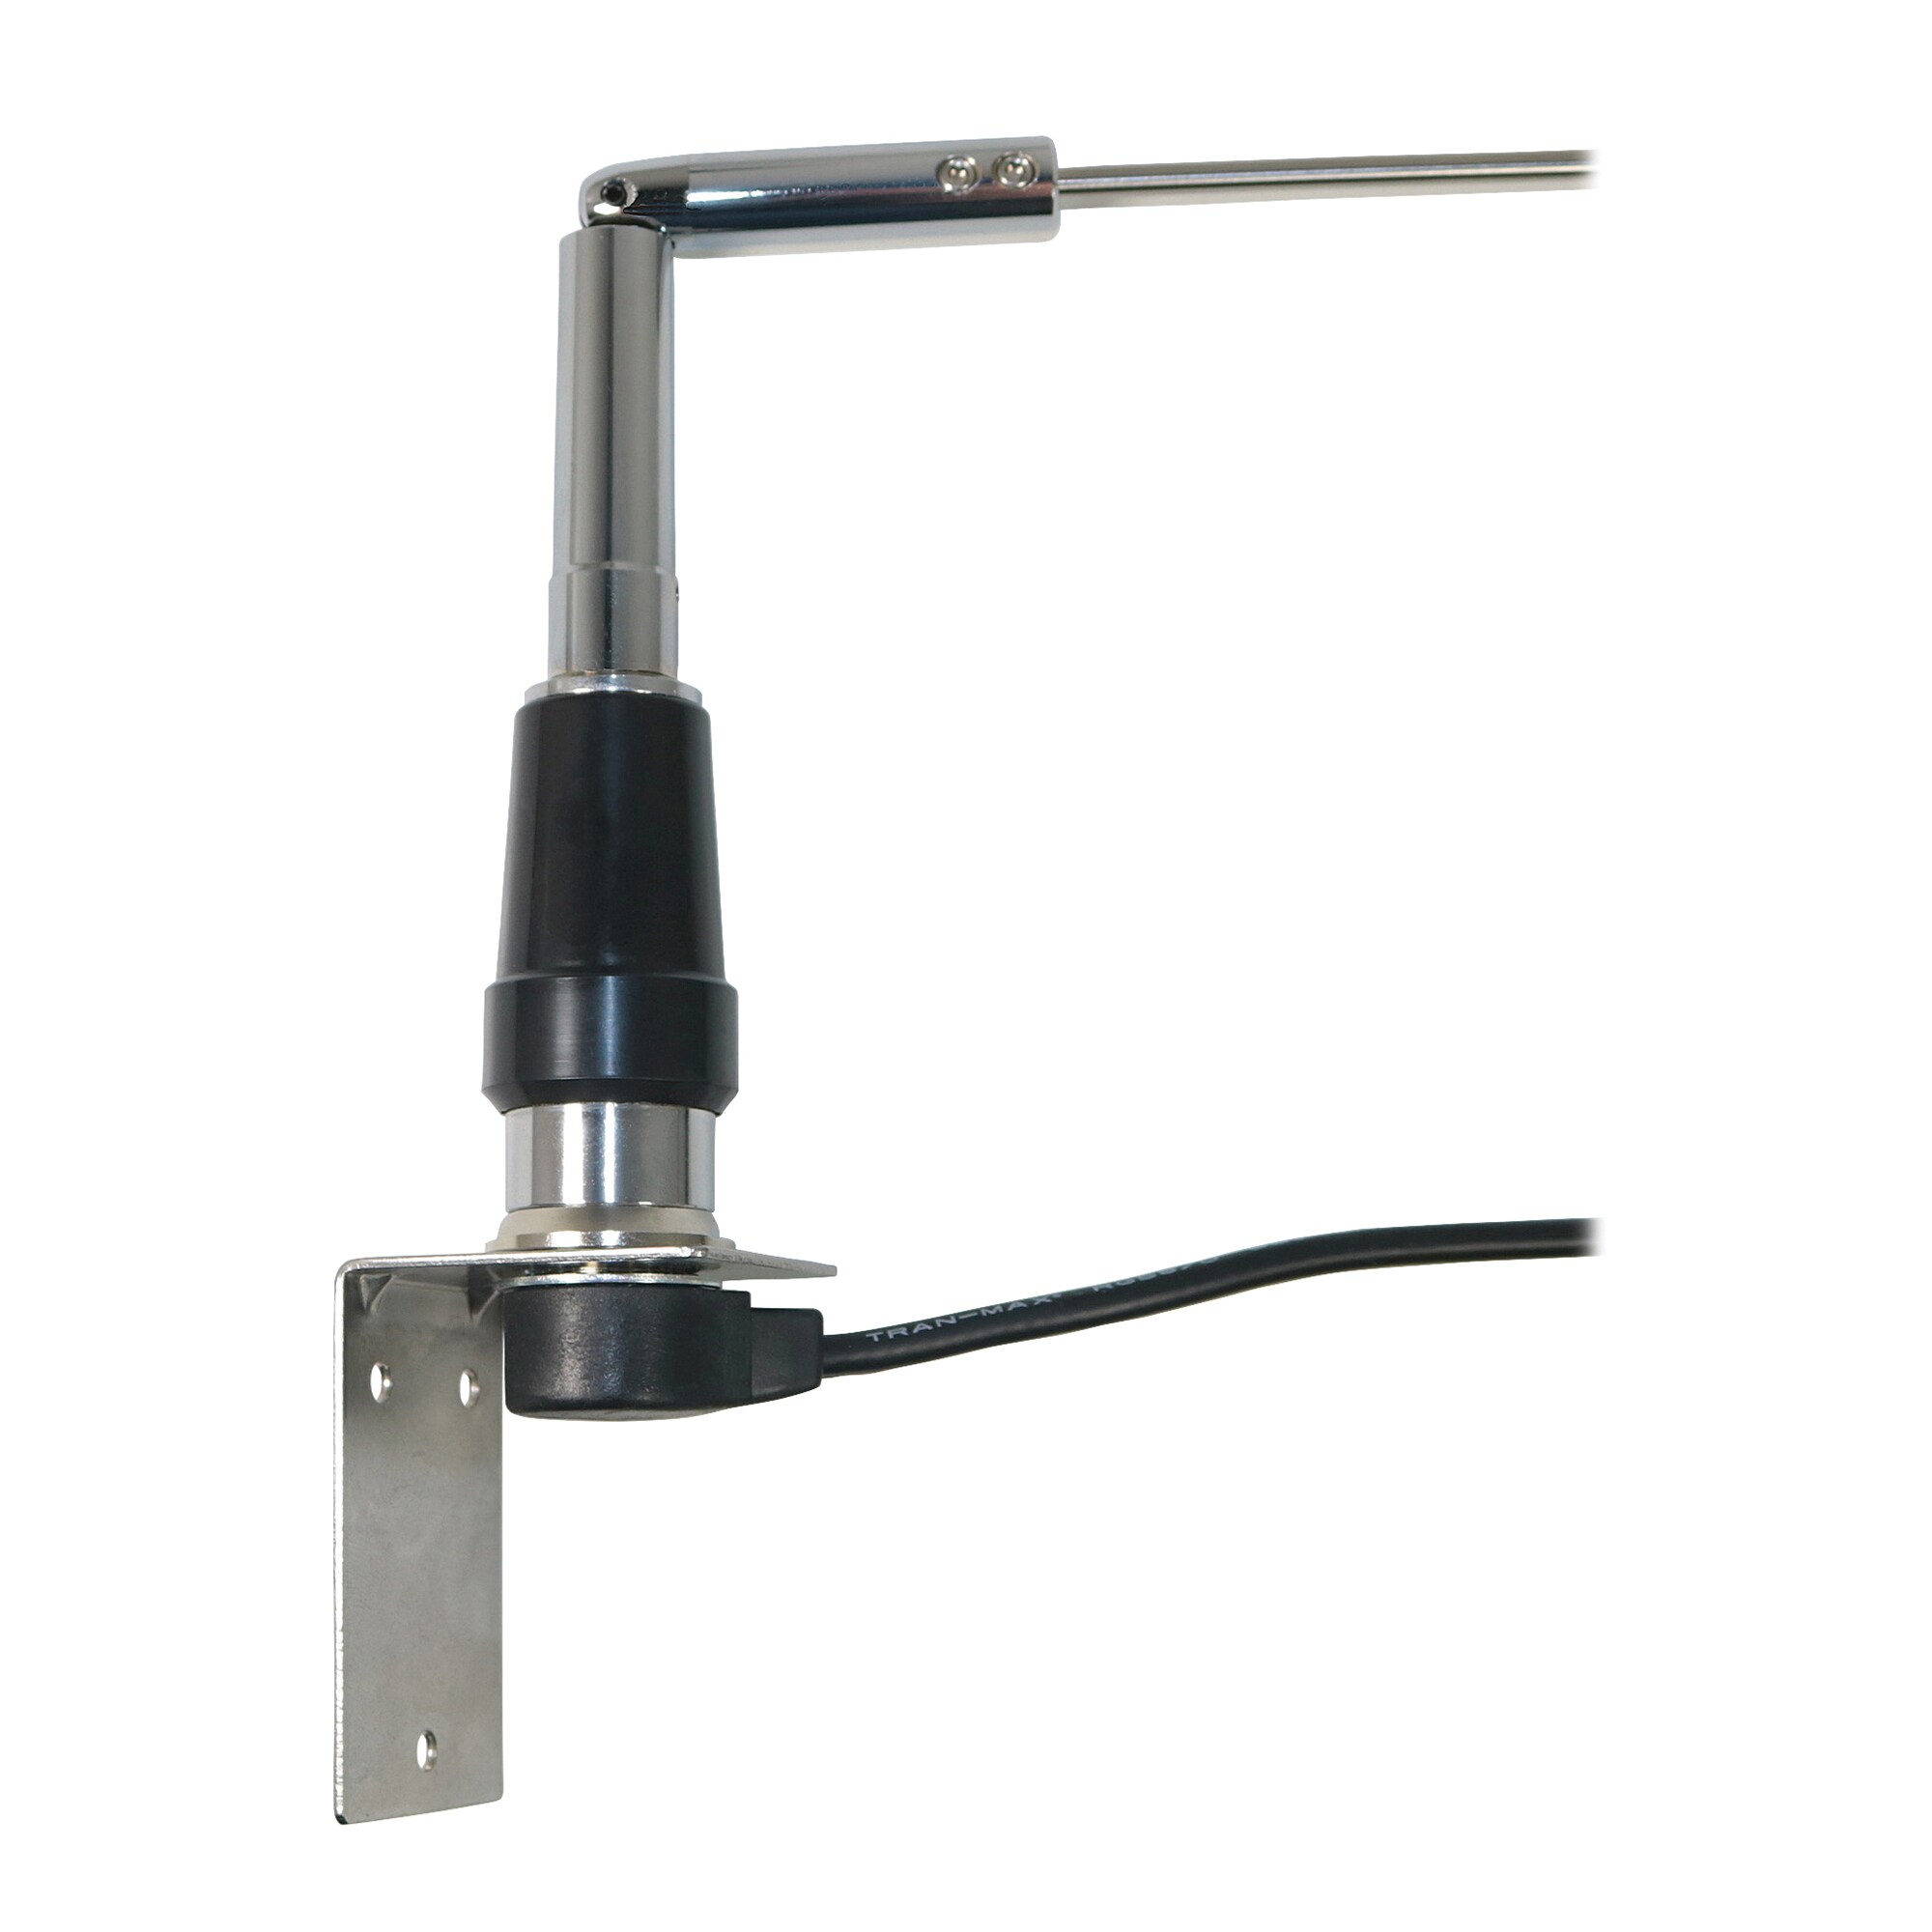 Tram 10275 100-Watt Pretuned 144-MHz to 174-MHz VHF Lift-and Lay-Over 30-MHz-Bandwidth Whip Antenna with Extremely High-Gain 4.1-dBd Long-Distance Transmit and Receive and SO-239 Mount in the Mobile Audio department at Lowes